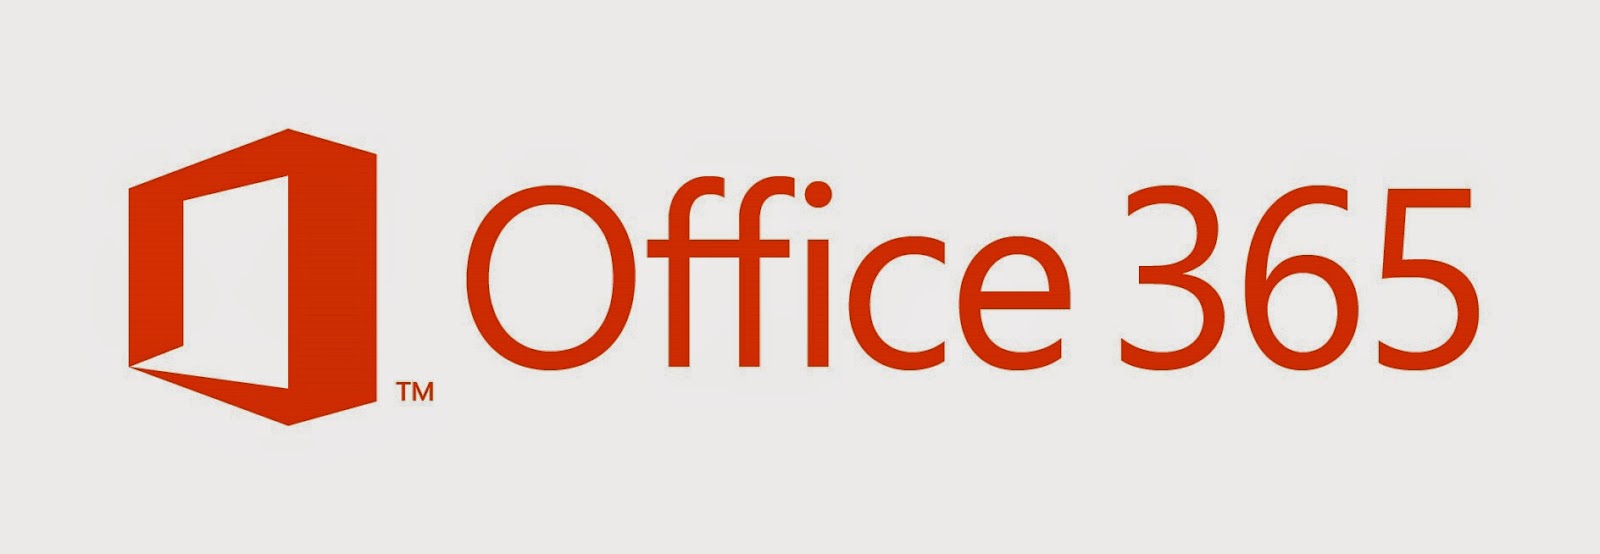 is office 2011 the latest version of office 365